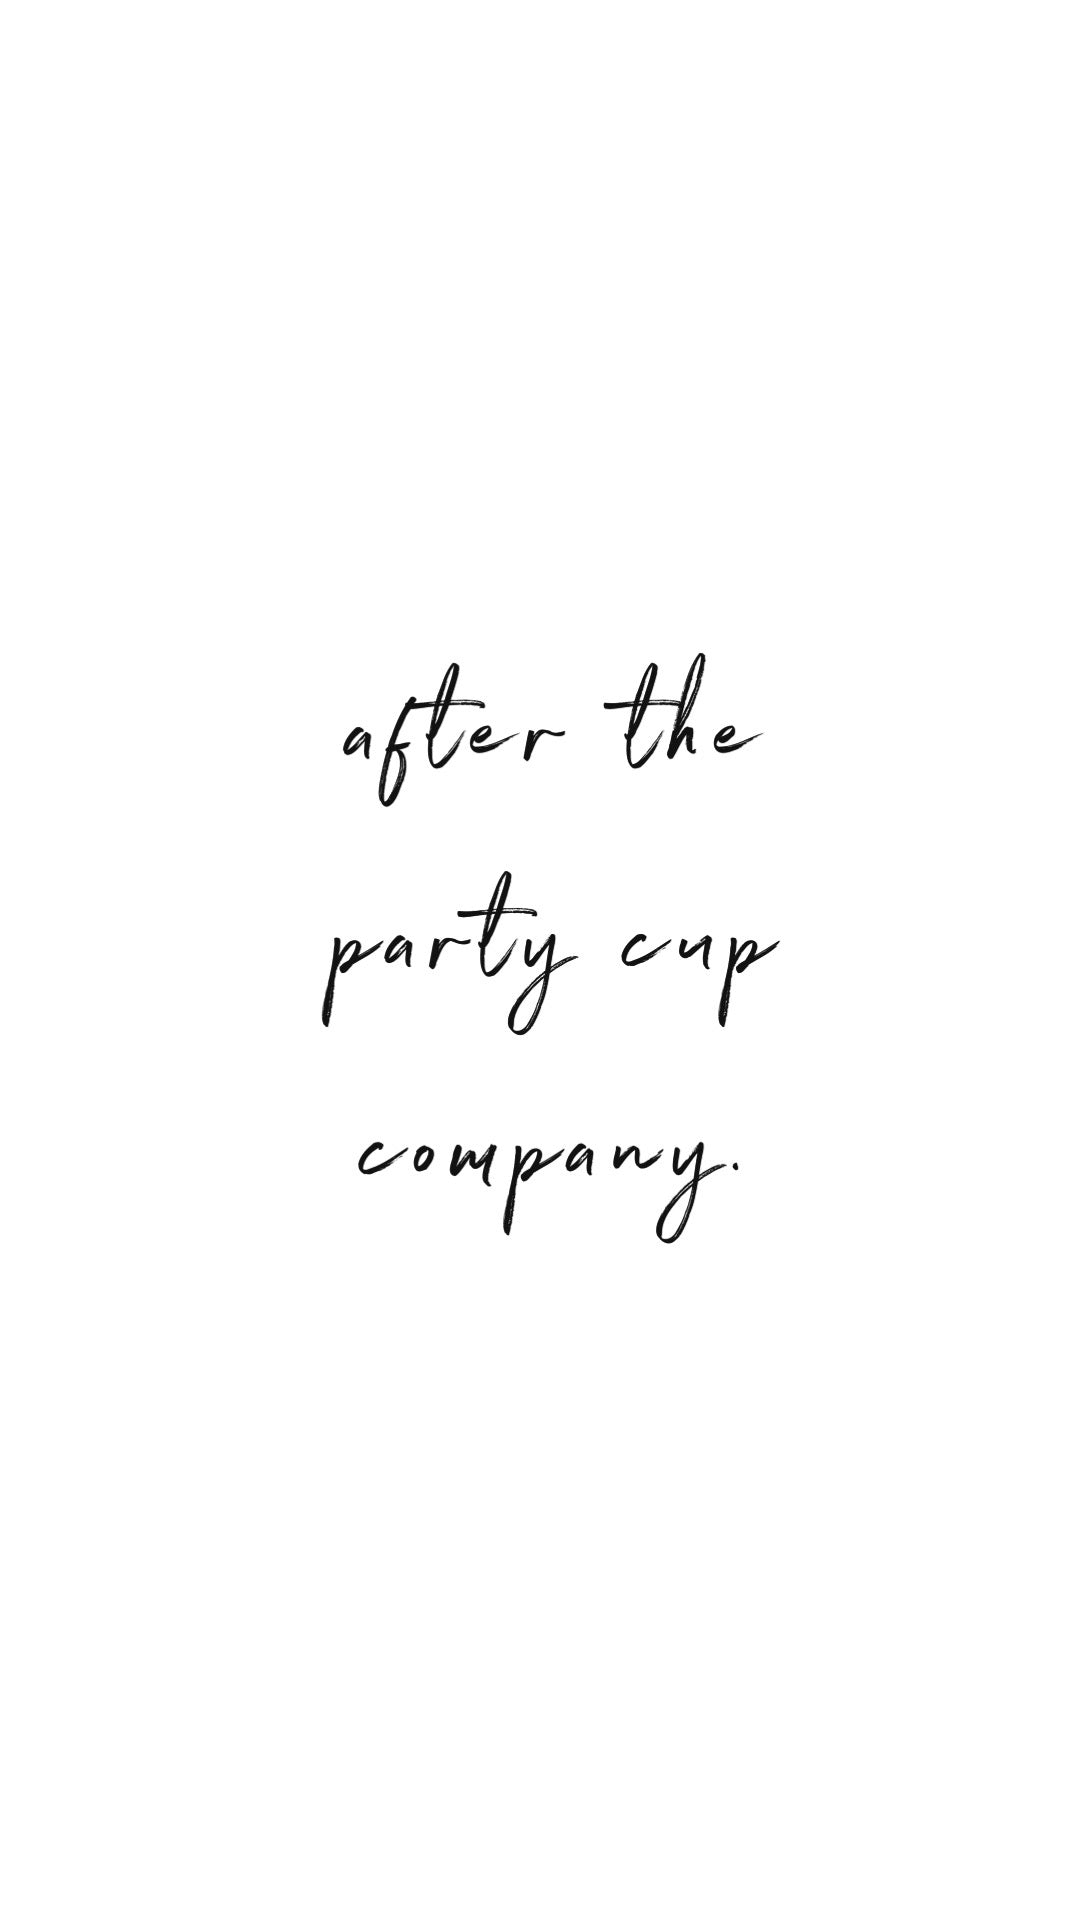 After the Party Cup Company